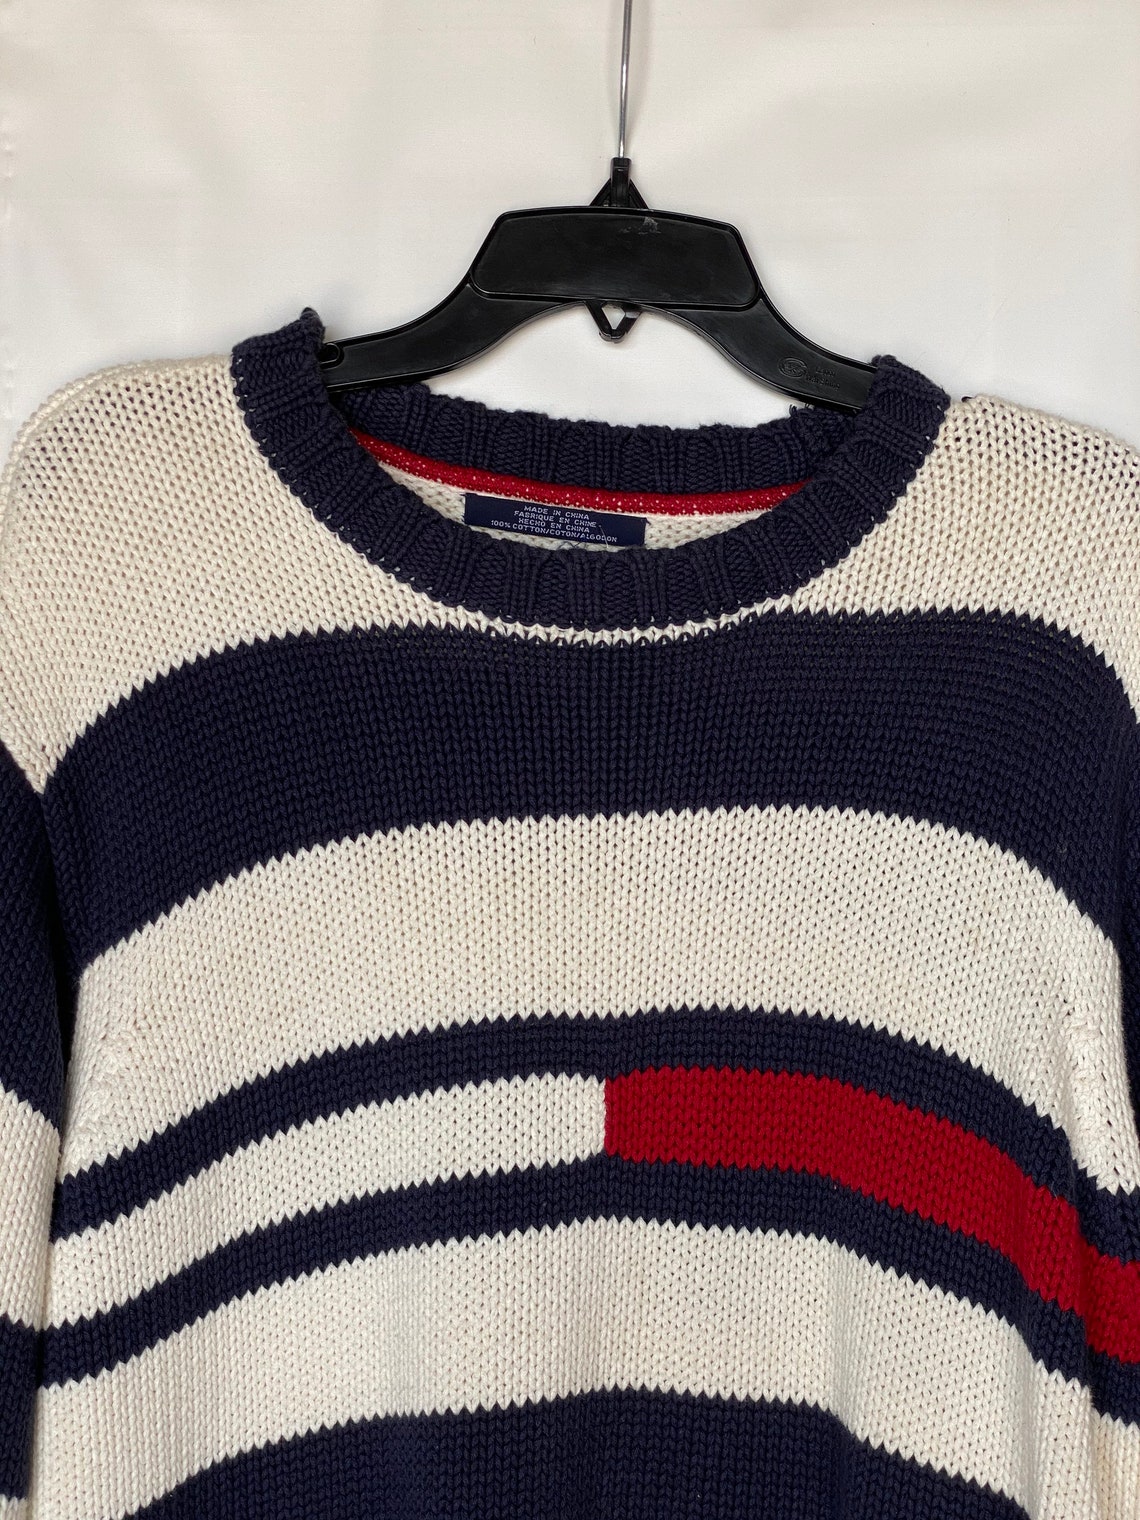 Vintage 90s knitted Tommy Hilfiger heavy sweatshirt / Large | Etsy